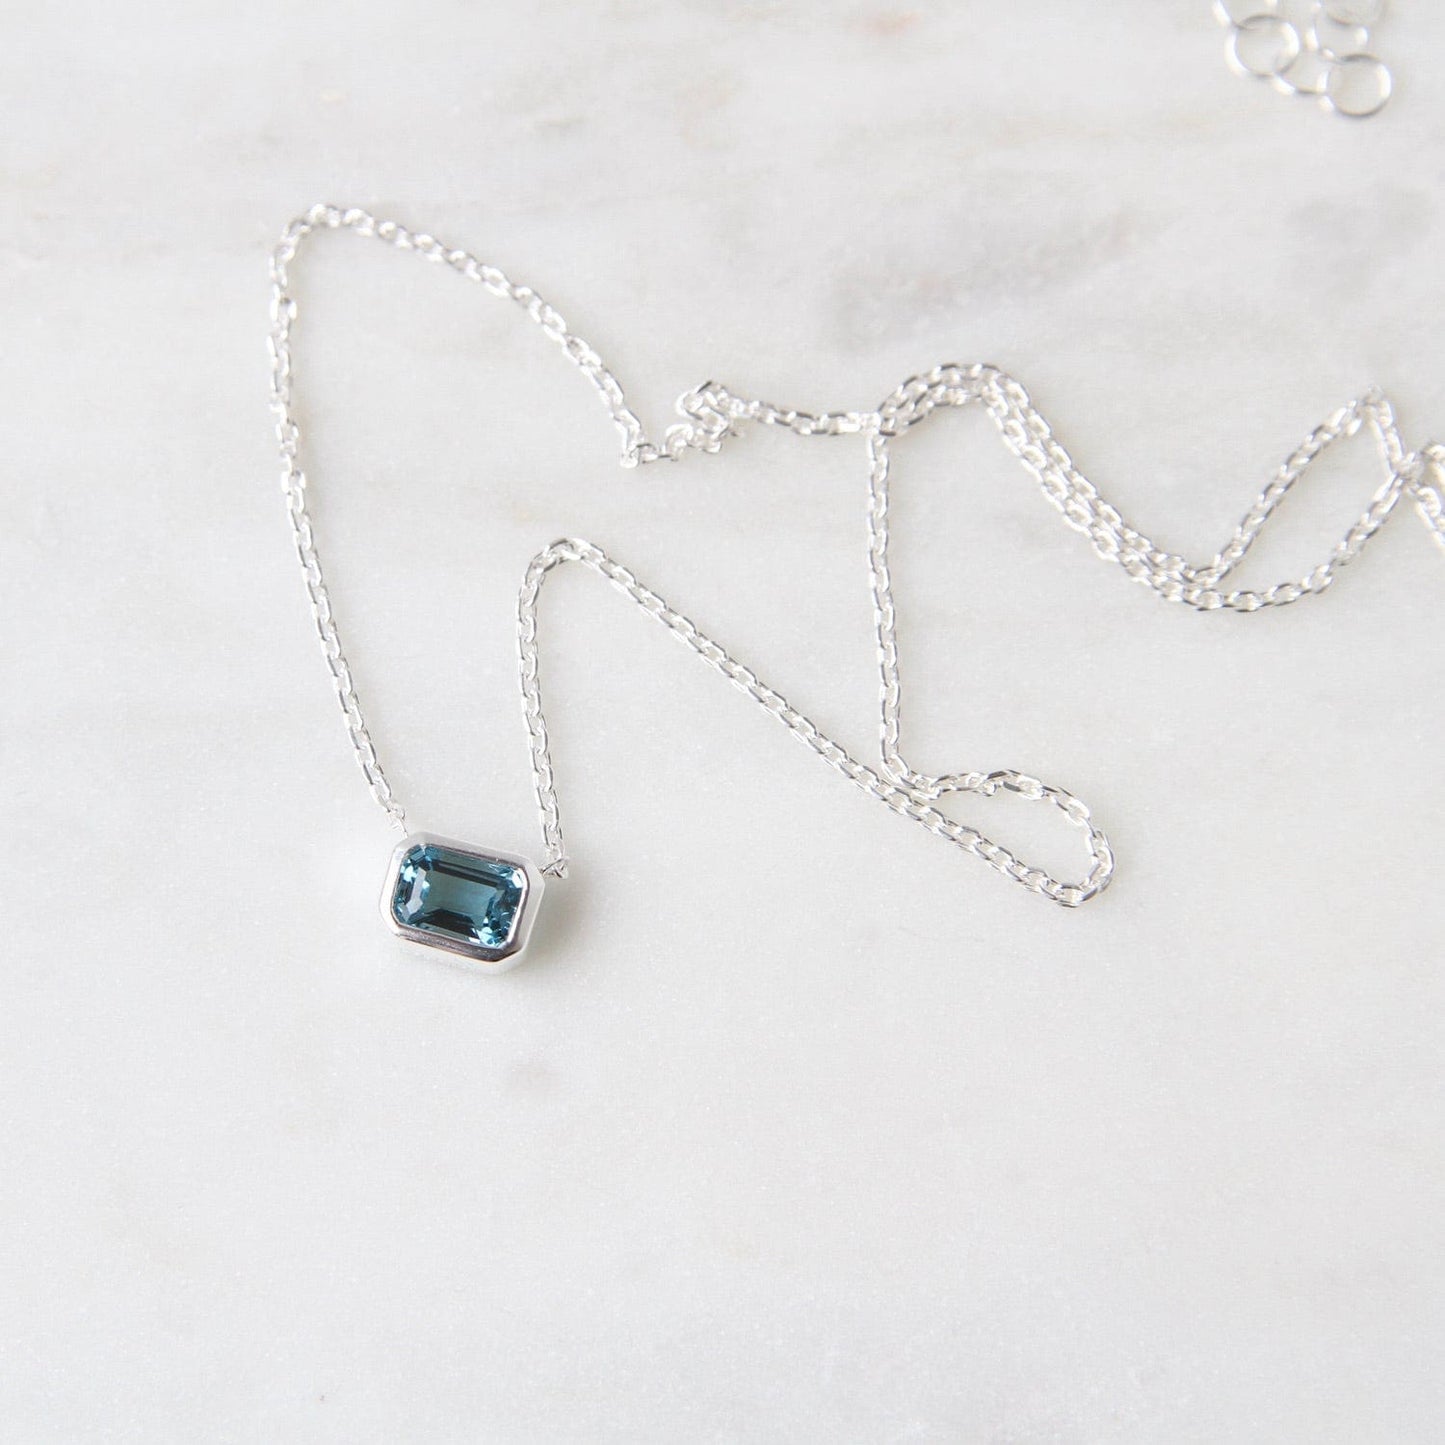 Load image into Gallery viewer, NKL Bezel Set Emerald Cut London Blue Topaz Solitaire Necklace
